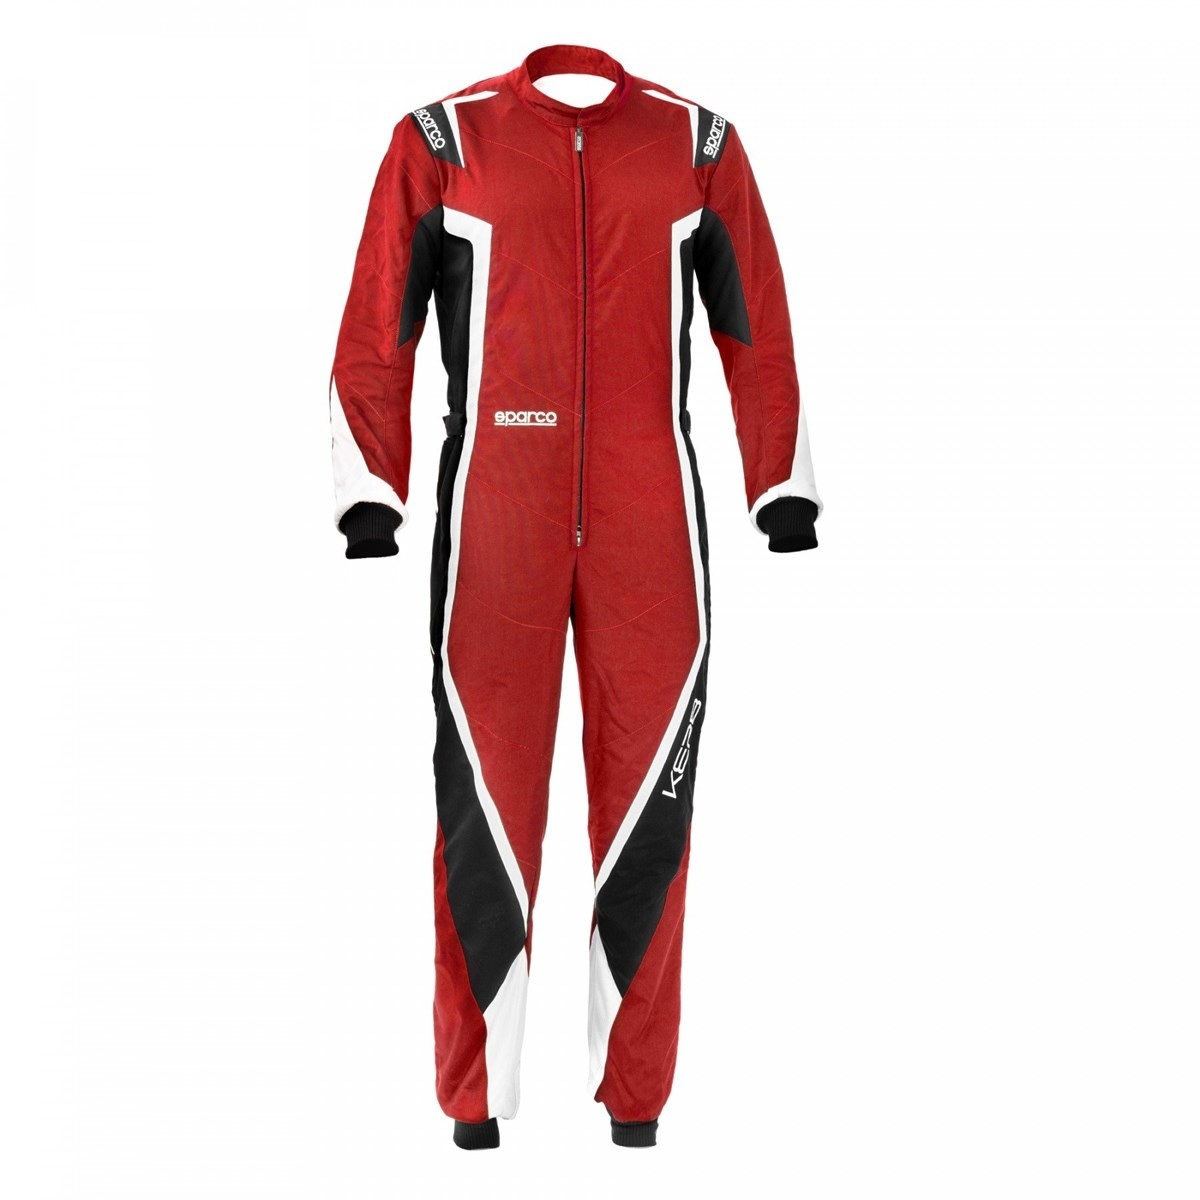 Racing Suit Sparco Sprint R566 Red/Black, Sparco